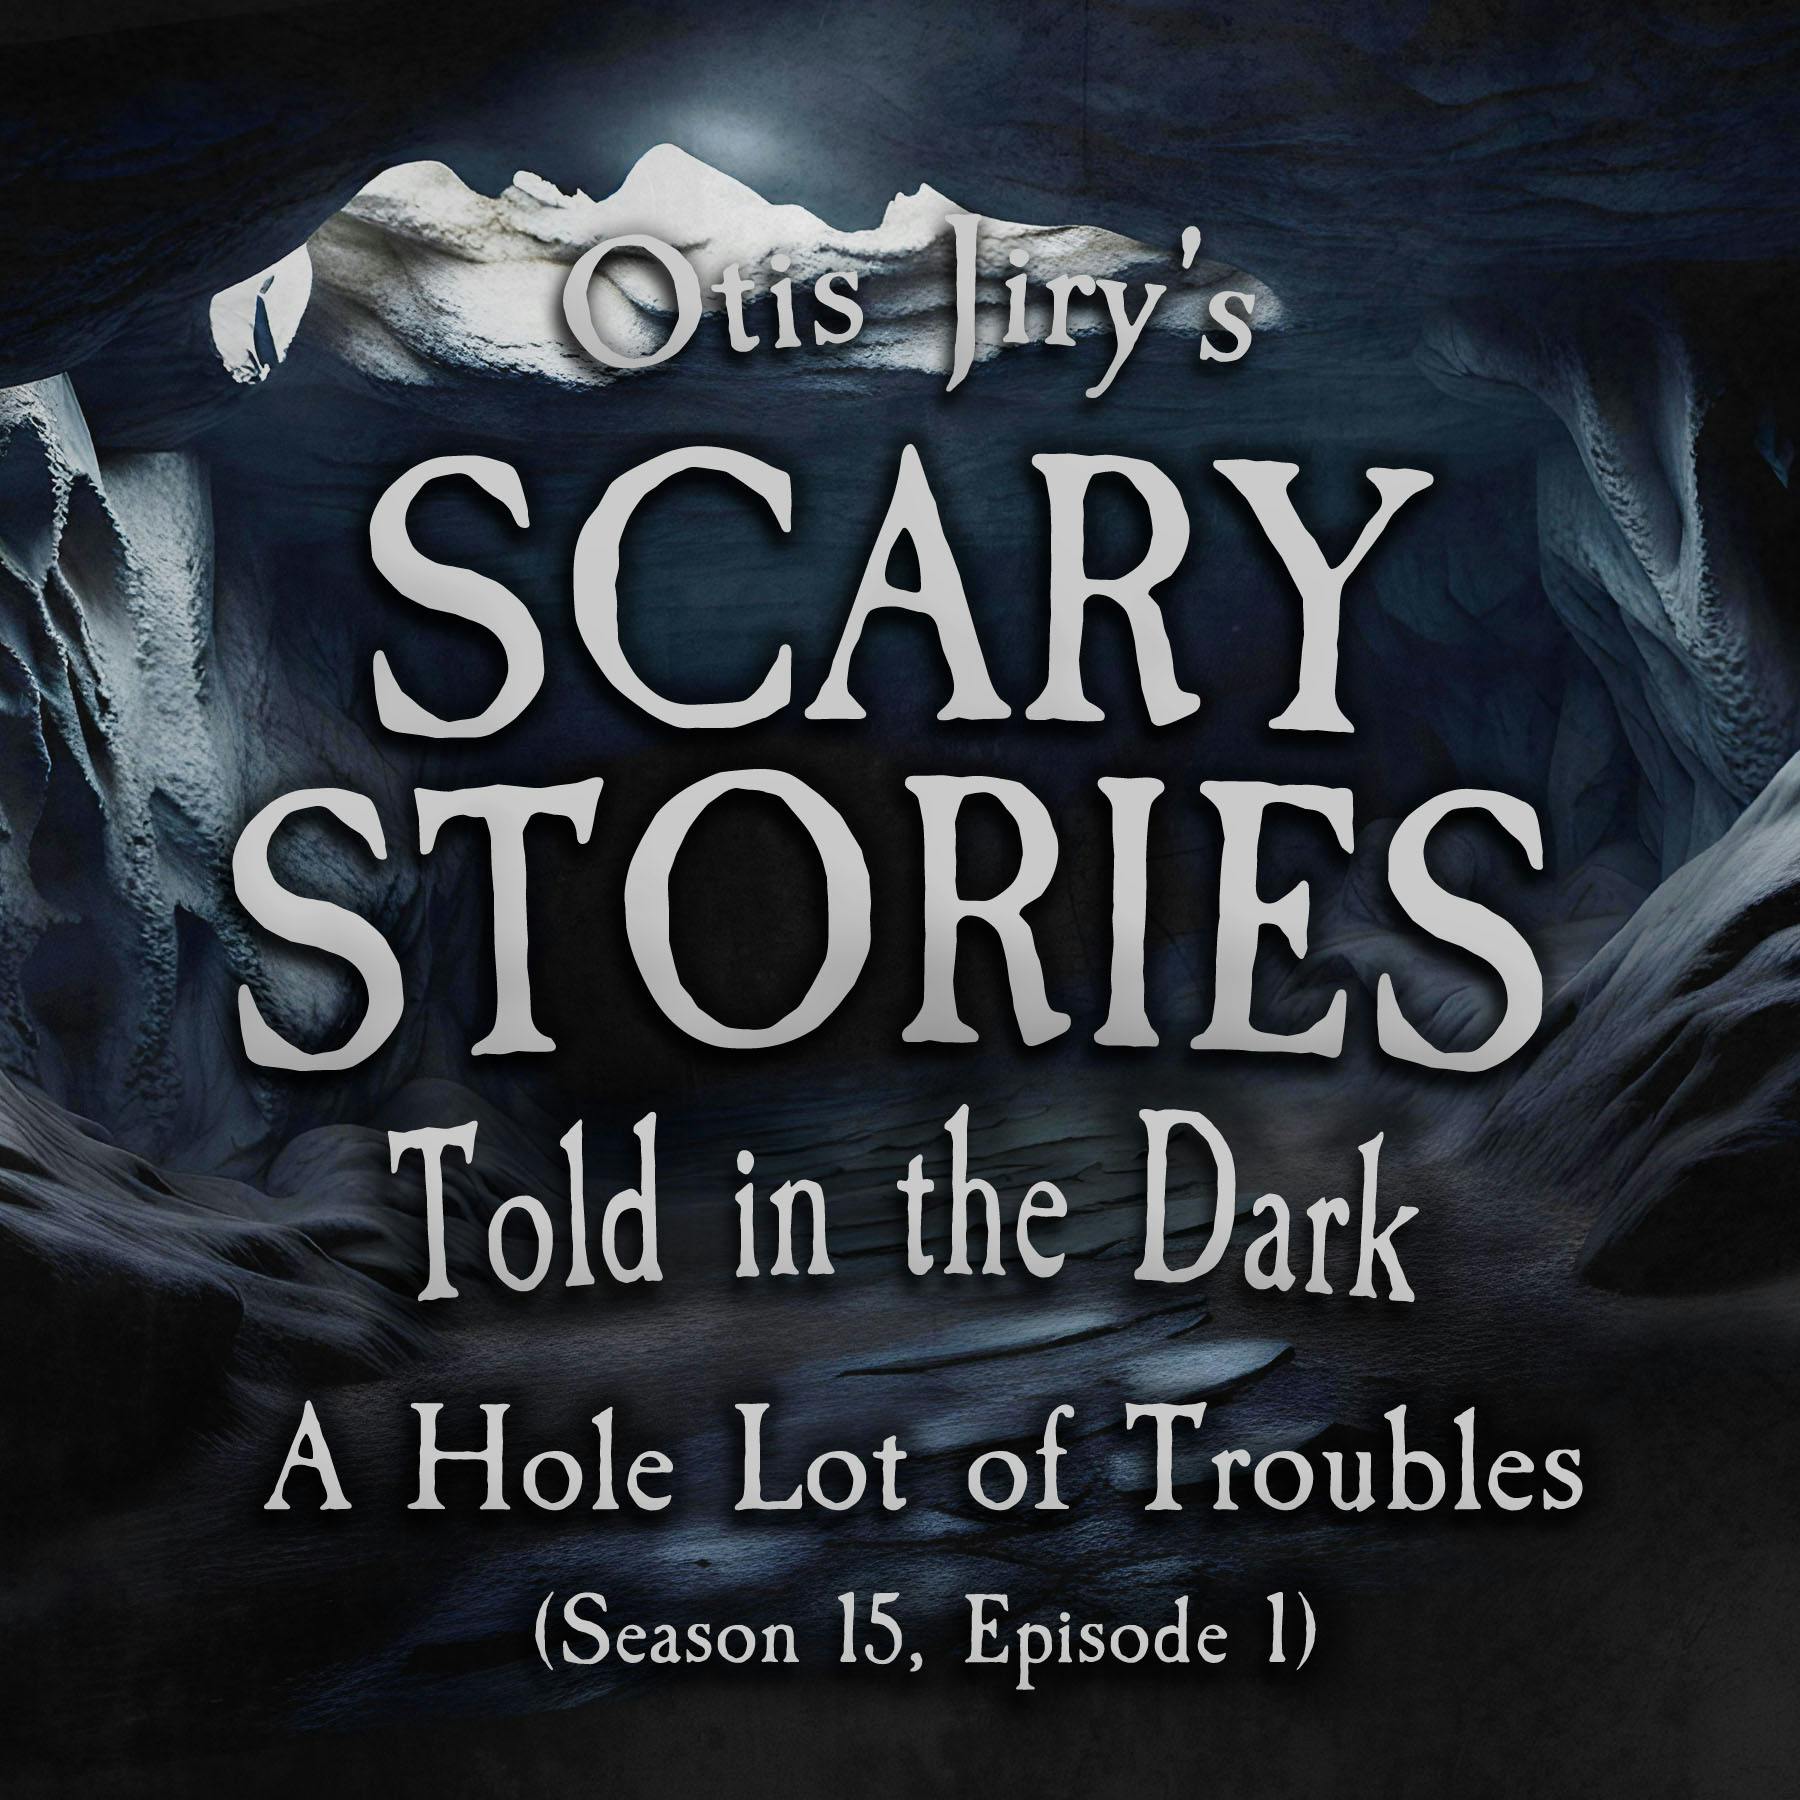 S15E01 - ”A Hole Lot of Troubles” – Scary Stories Told in the Dark